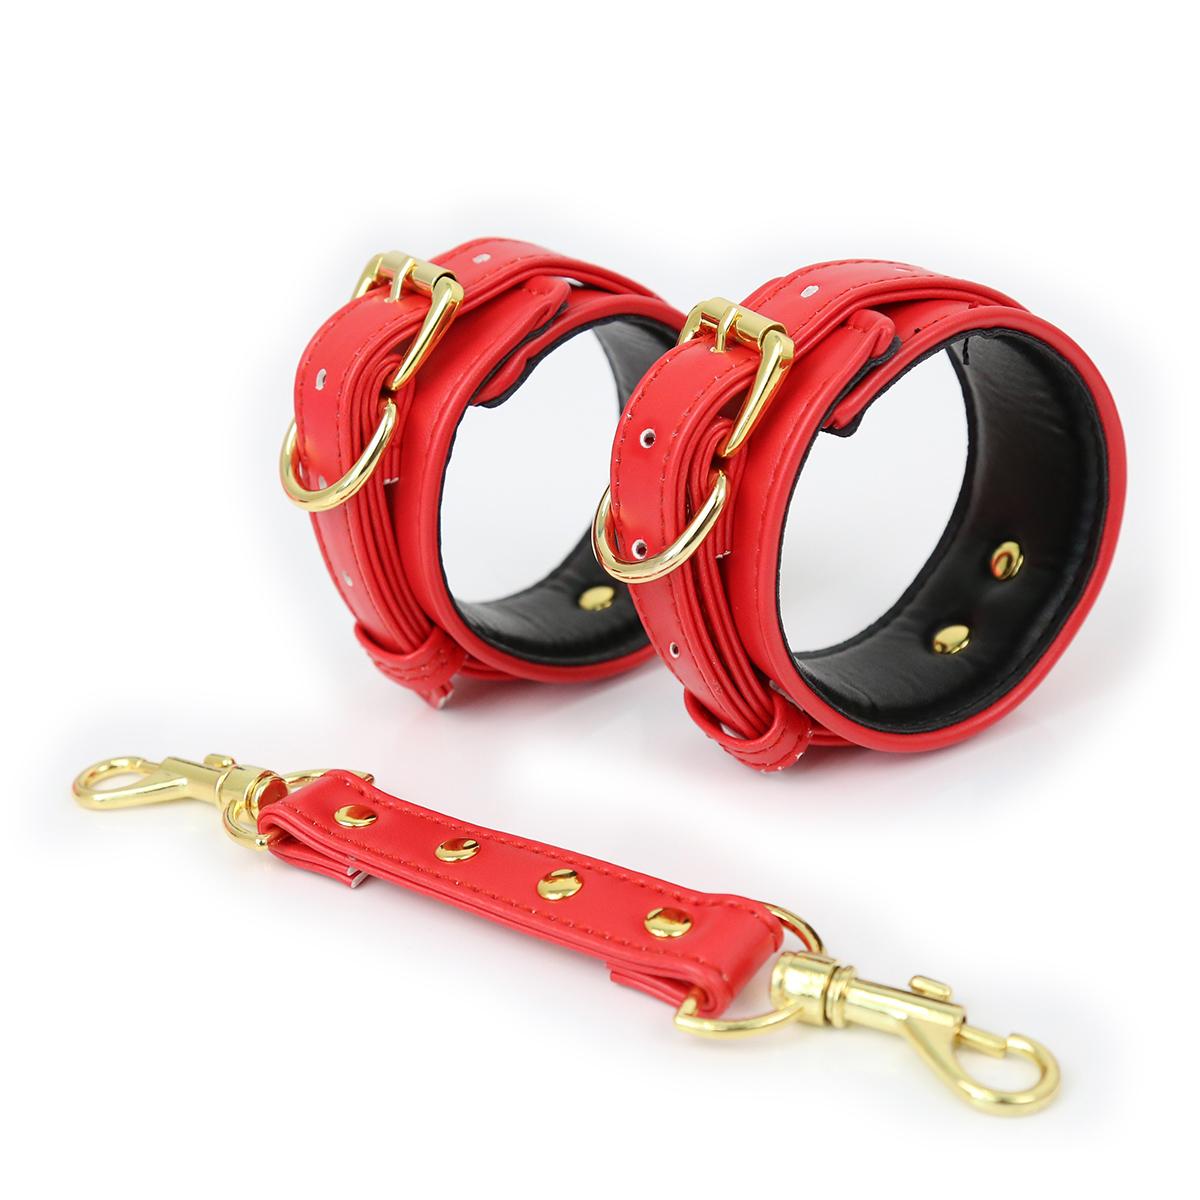 Bdsm Restraint Bondage Fetish Slave Handcuffs &amp; Ankle Cuffs Adult Erotic Sm Sex Toy For Woman Couples Games Sex Products